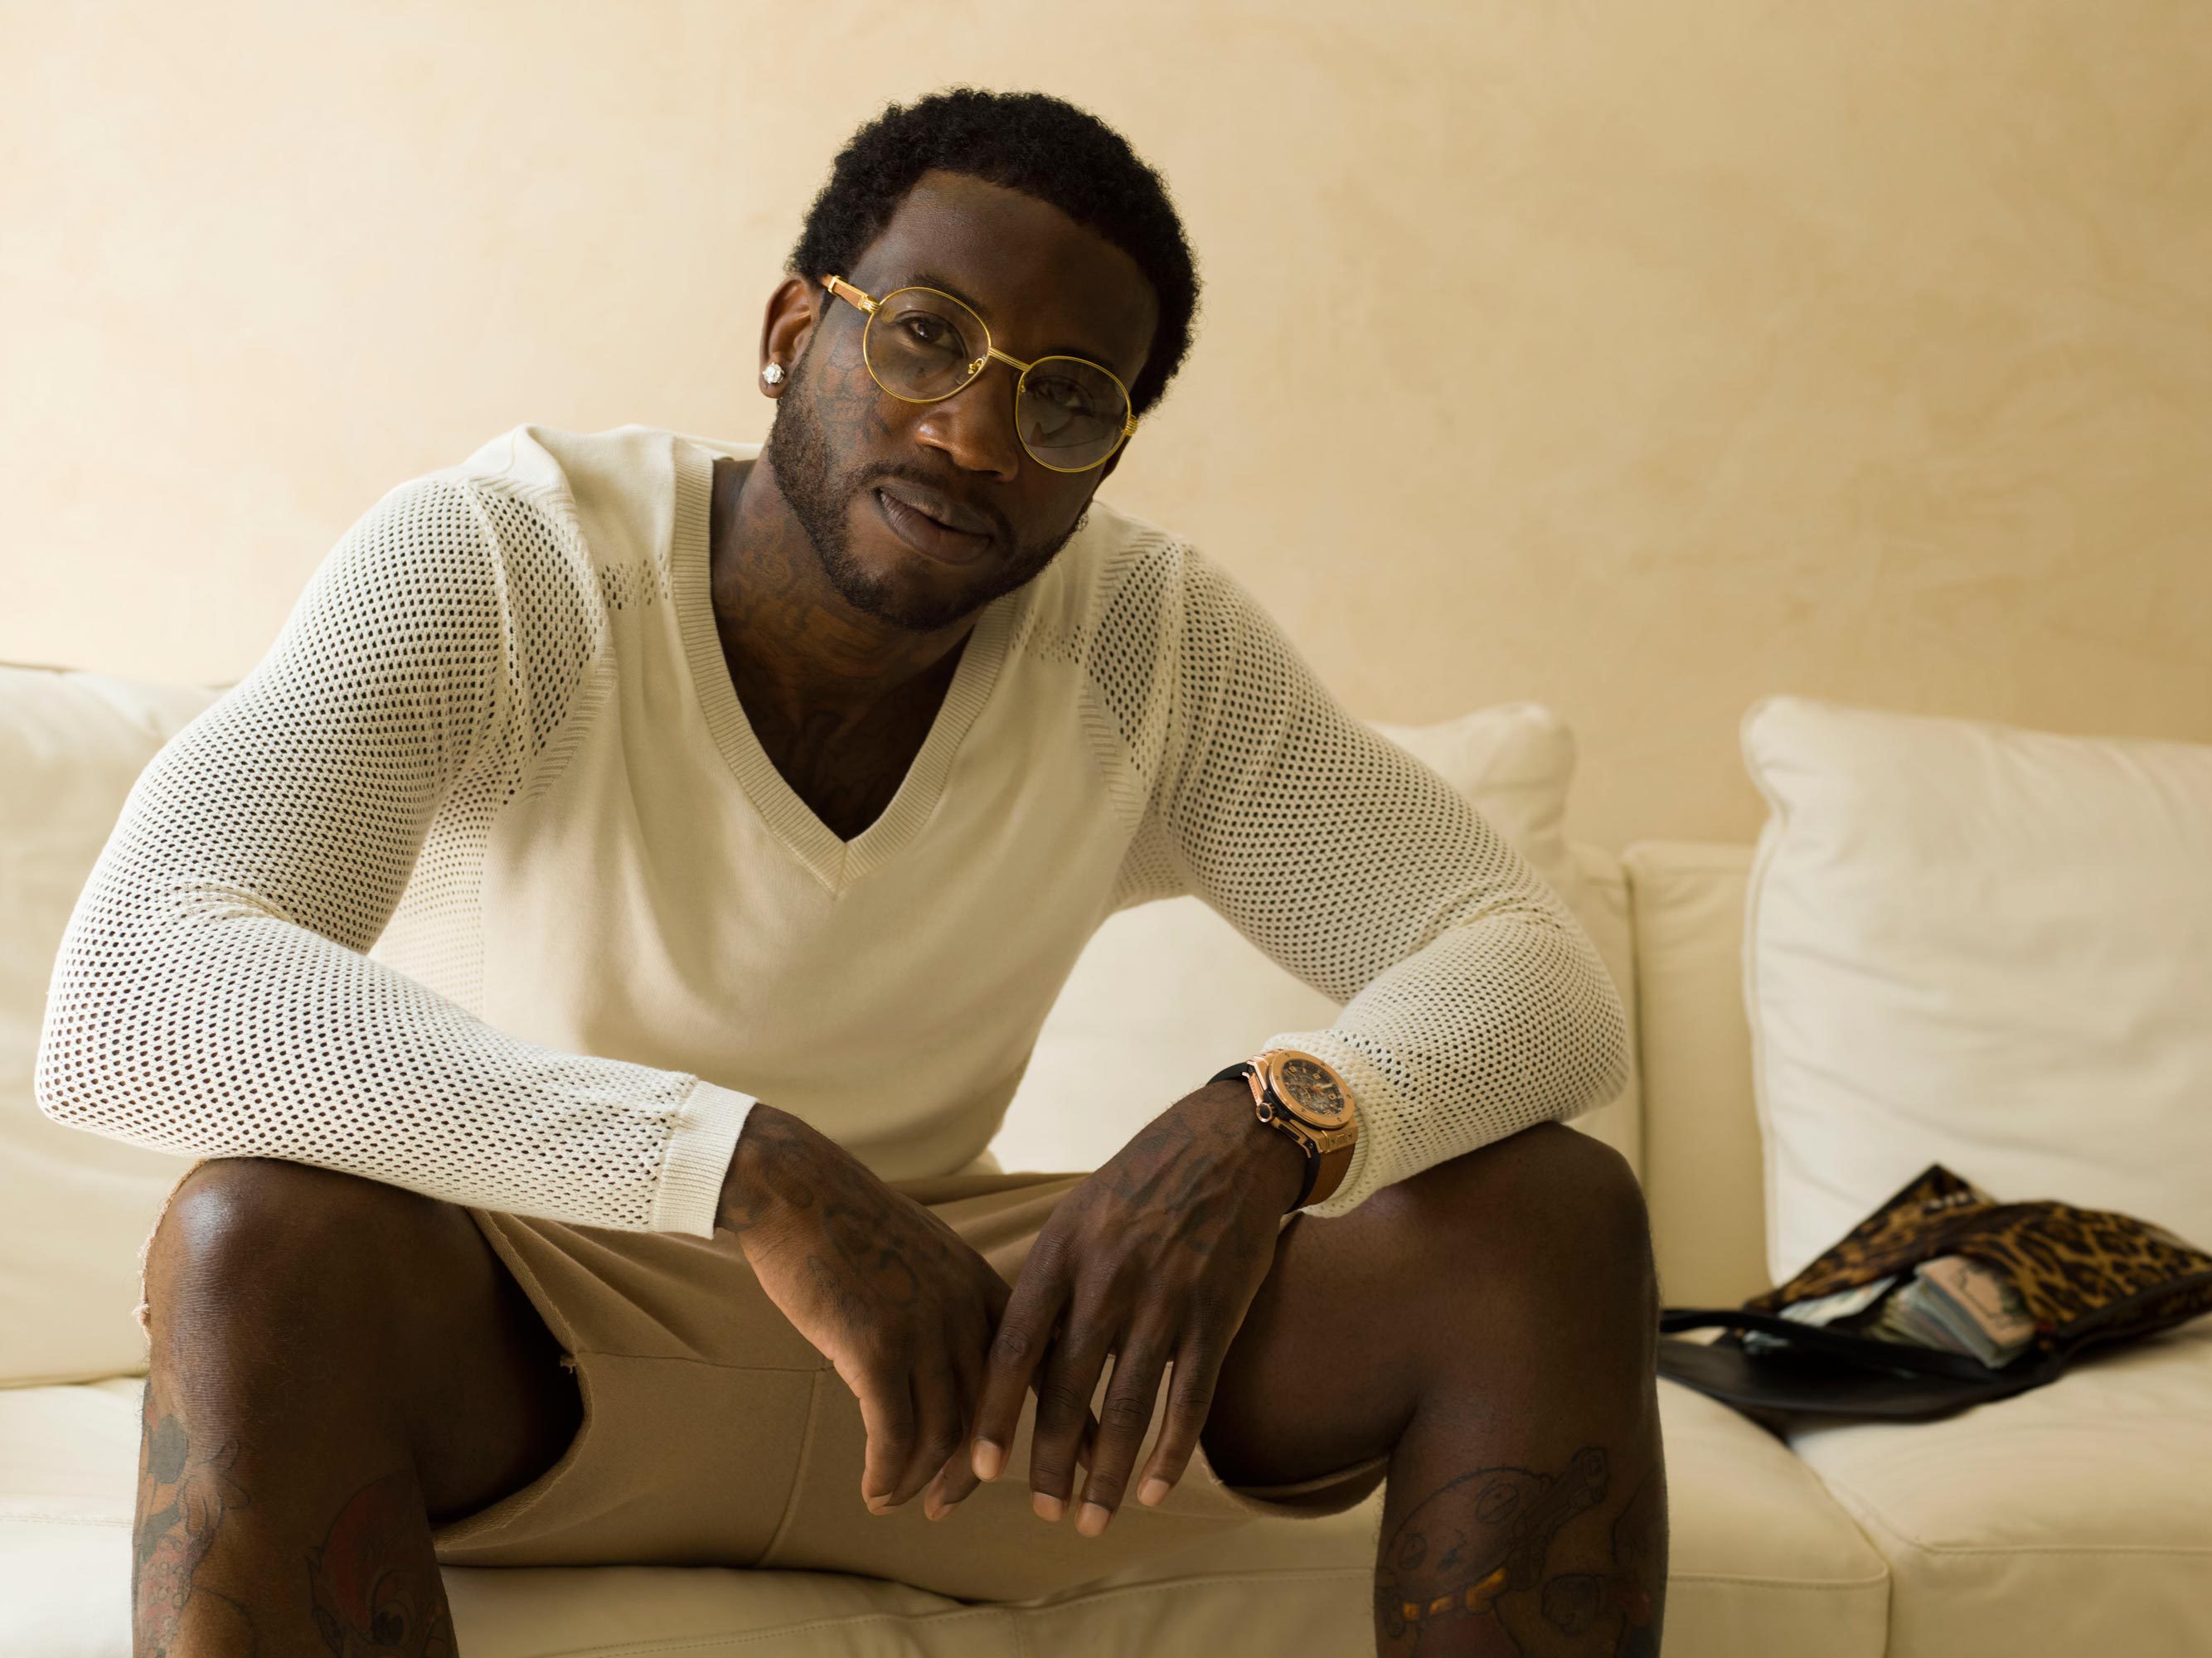 Free download Gucci Mane Wallpapers Images Photos Pictures Backgrounds  [2668x2000] for your Desktop, Mobile & Tablet | Explore 78+ Gucci Mane  Wallpapers | Gucci Logo Wallpaper, Gucci Desktop Wallpaper, Gucci Mane  Wallpaper for Computer